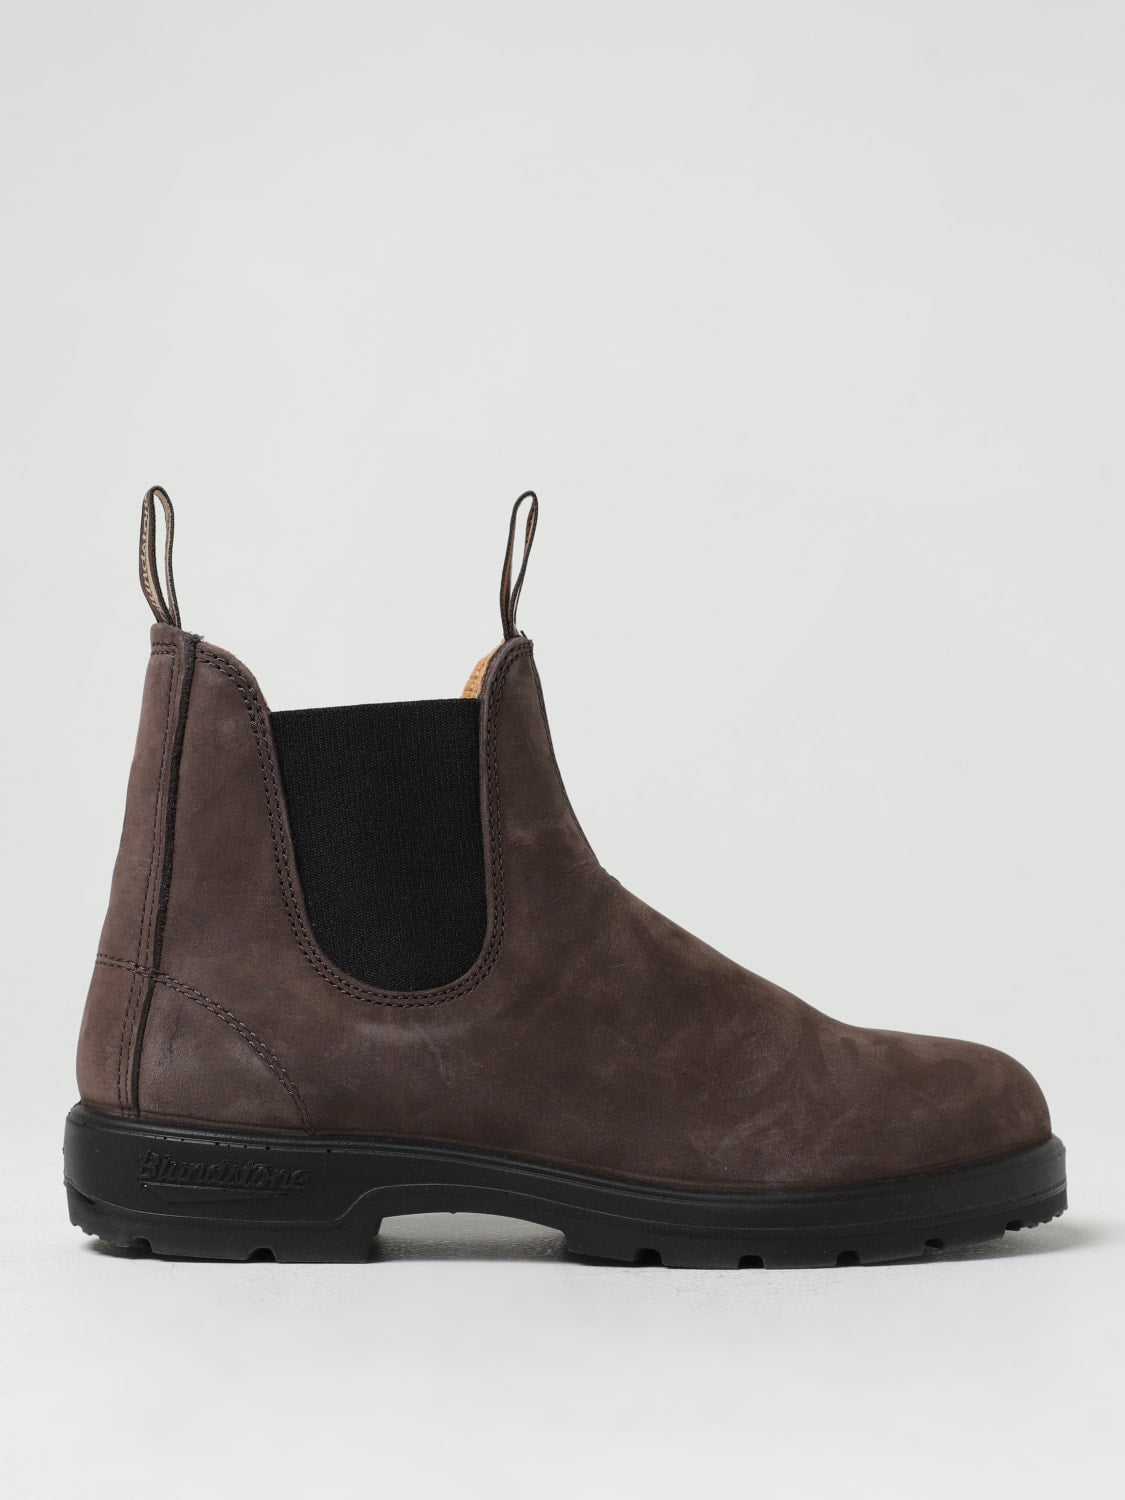 Blundstone Boots - Brown